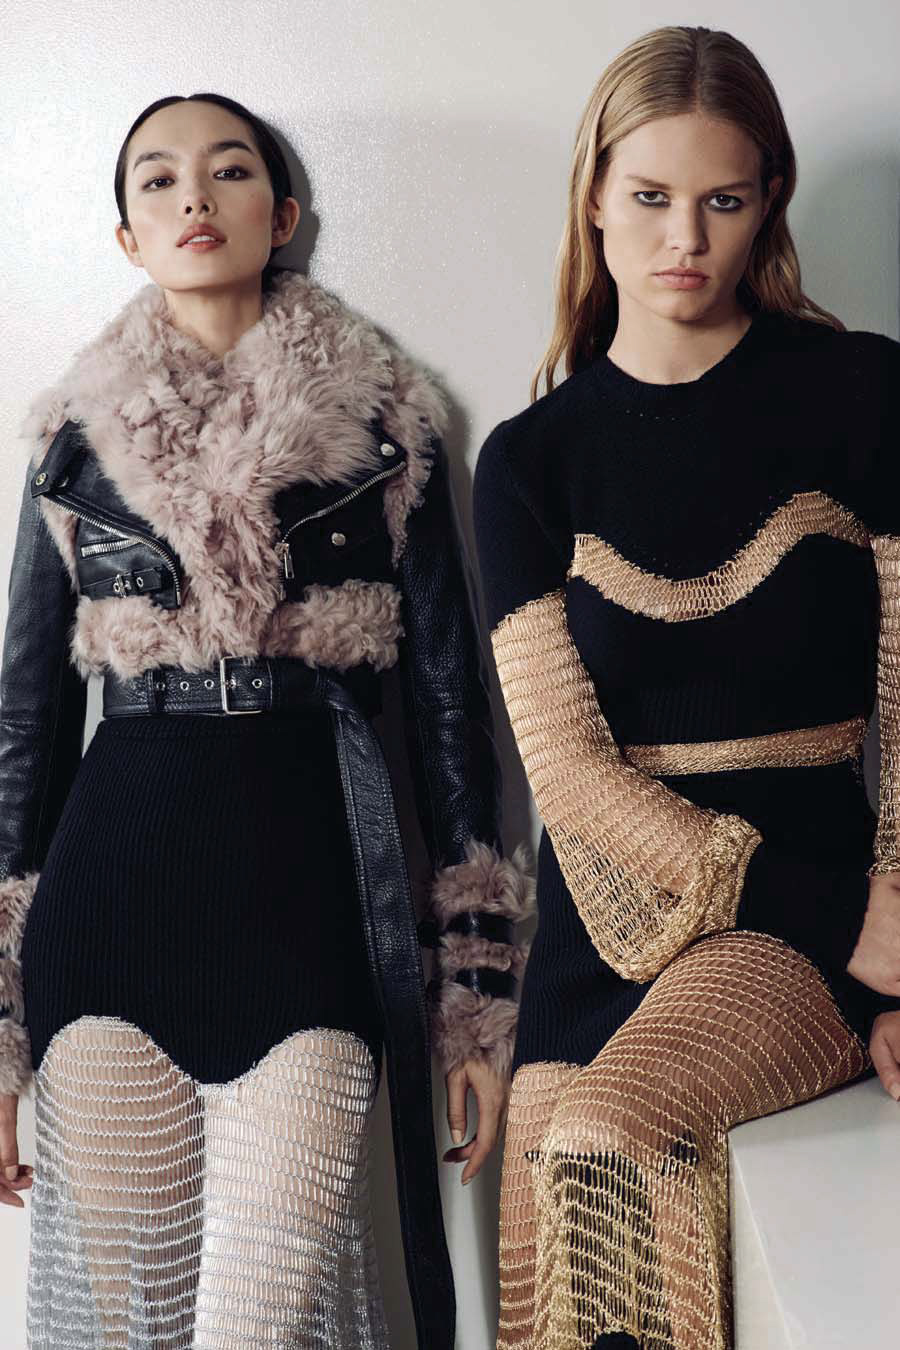 Anna Ewers and Fei Fei Sun cover Vogue China September 2017 by Collier Schorr